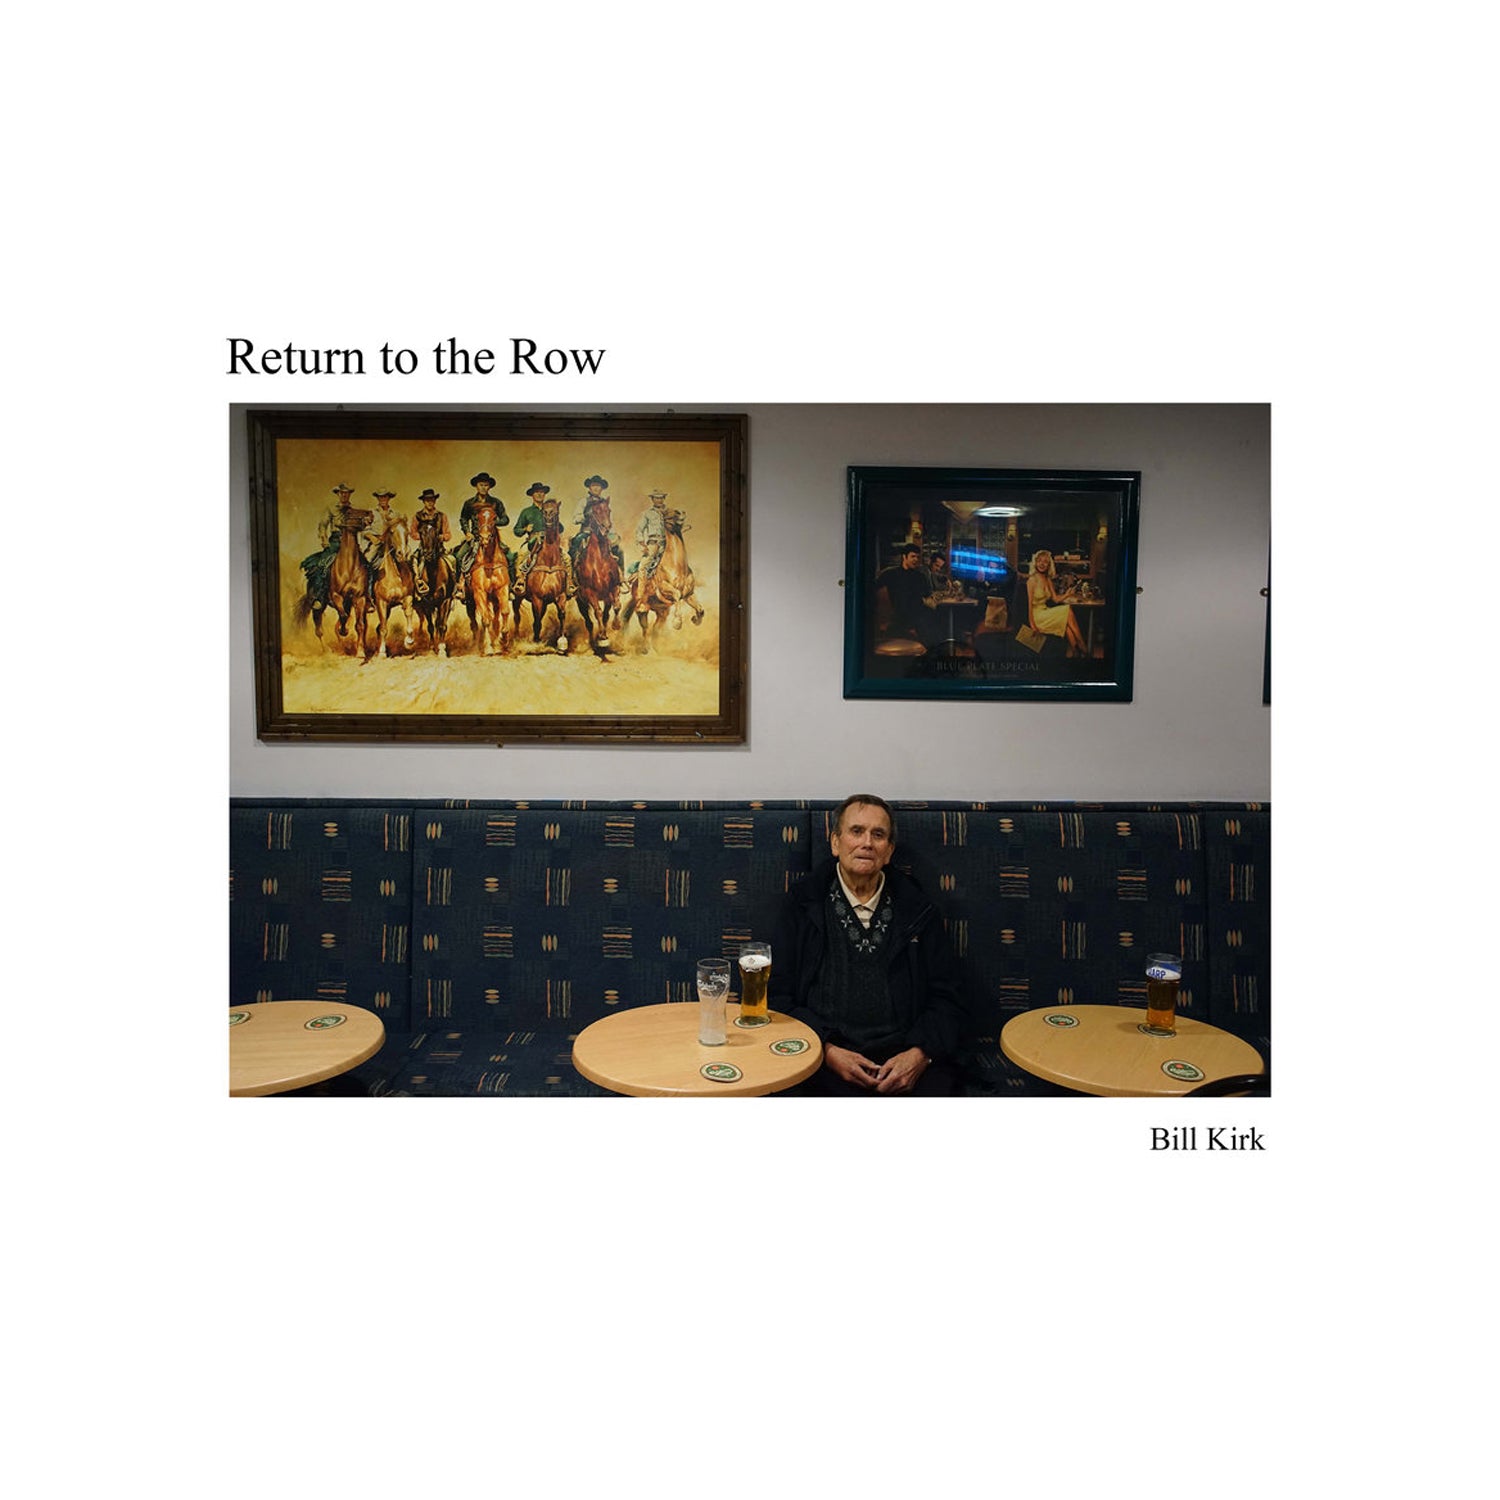 Return to the Row by Bill Kirk Photo Museum Ireland